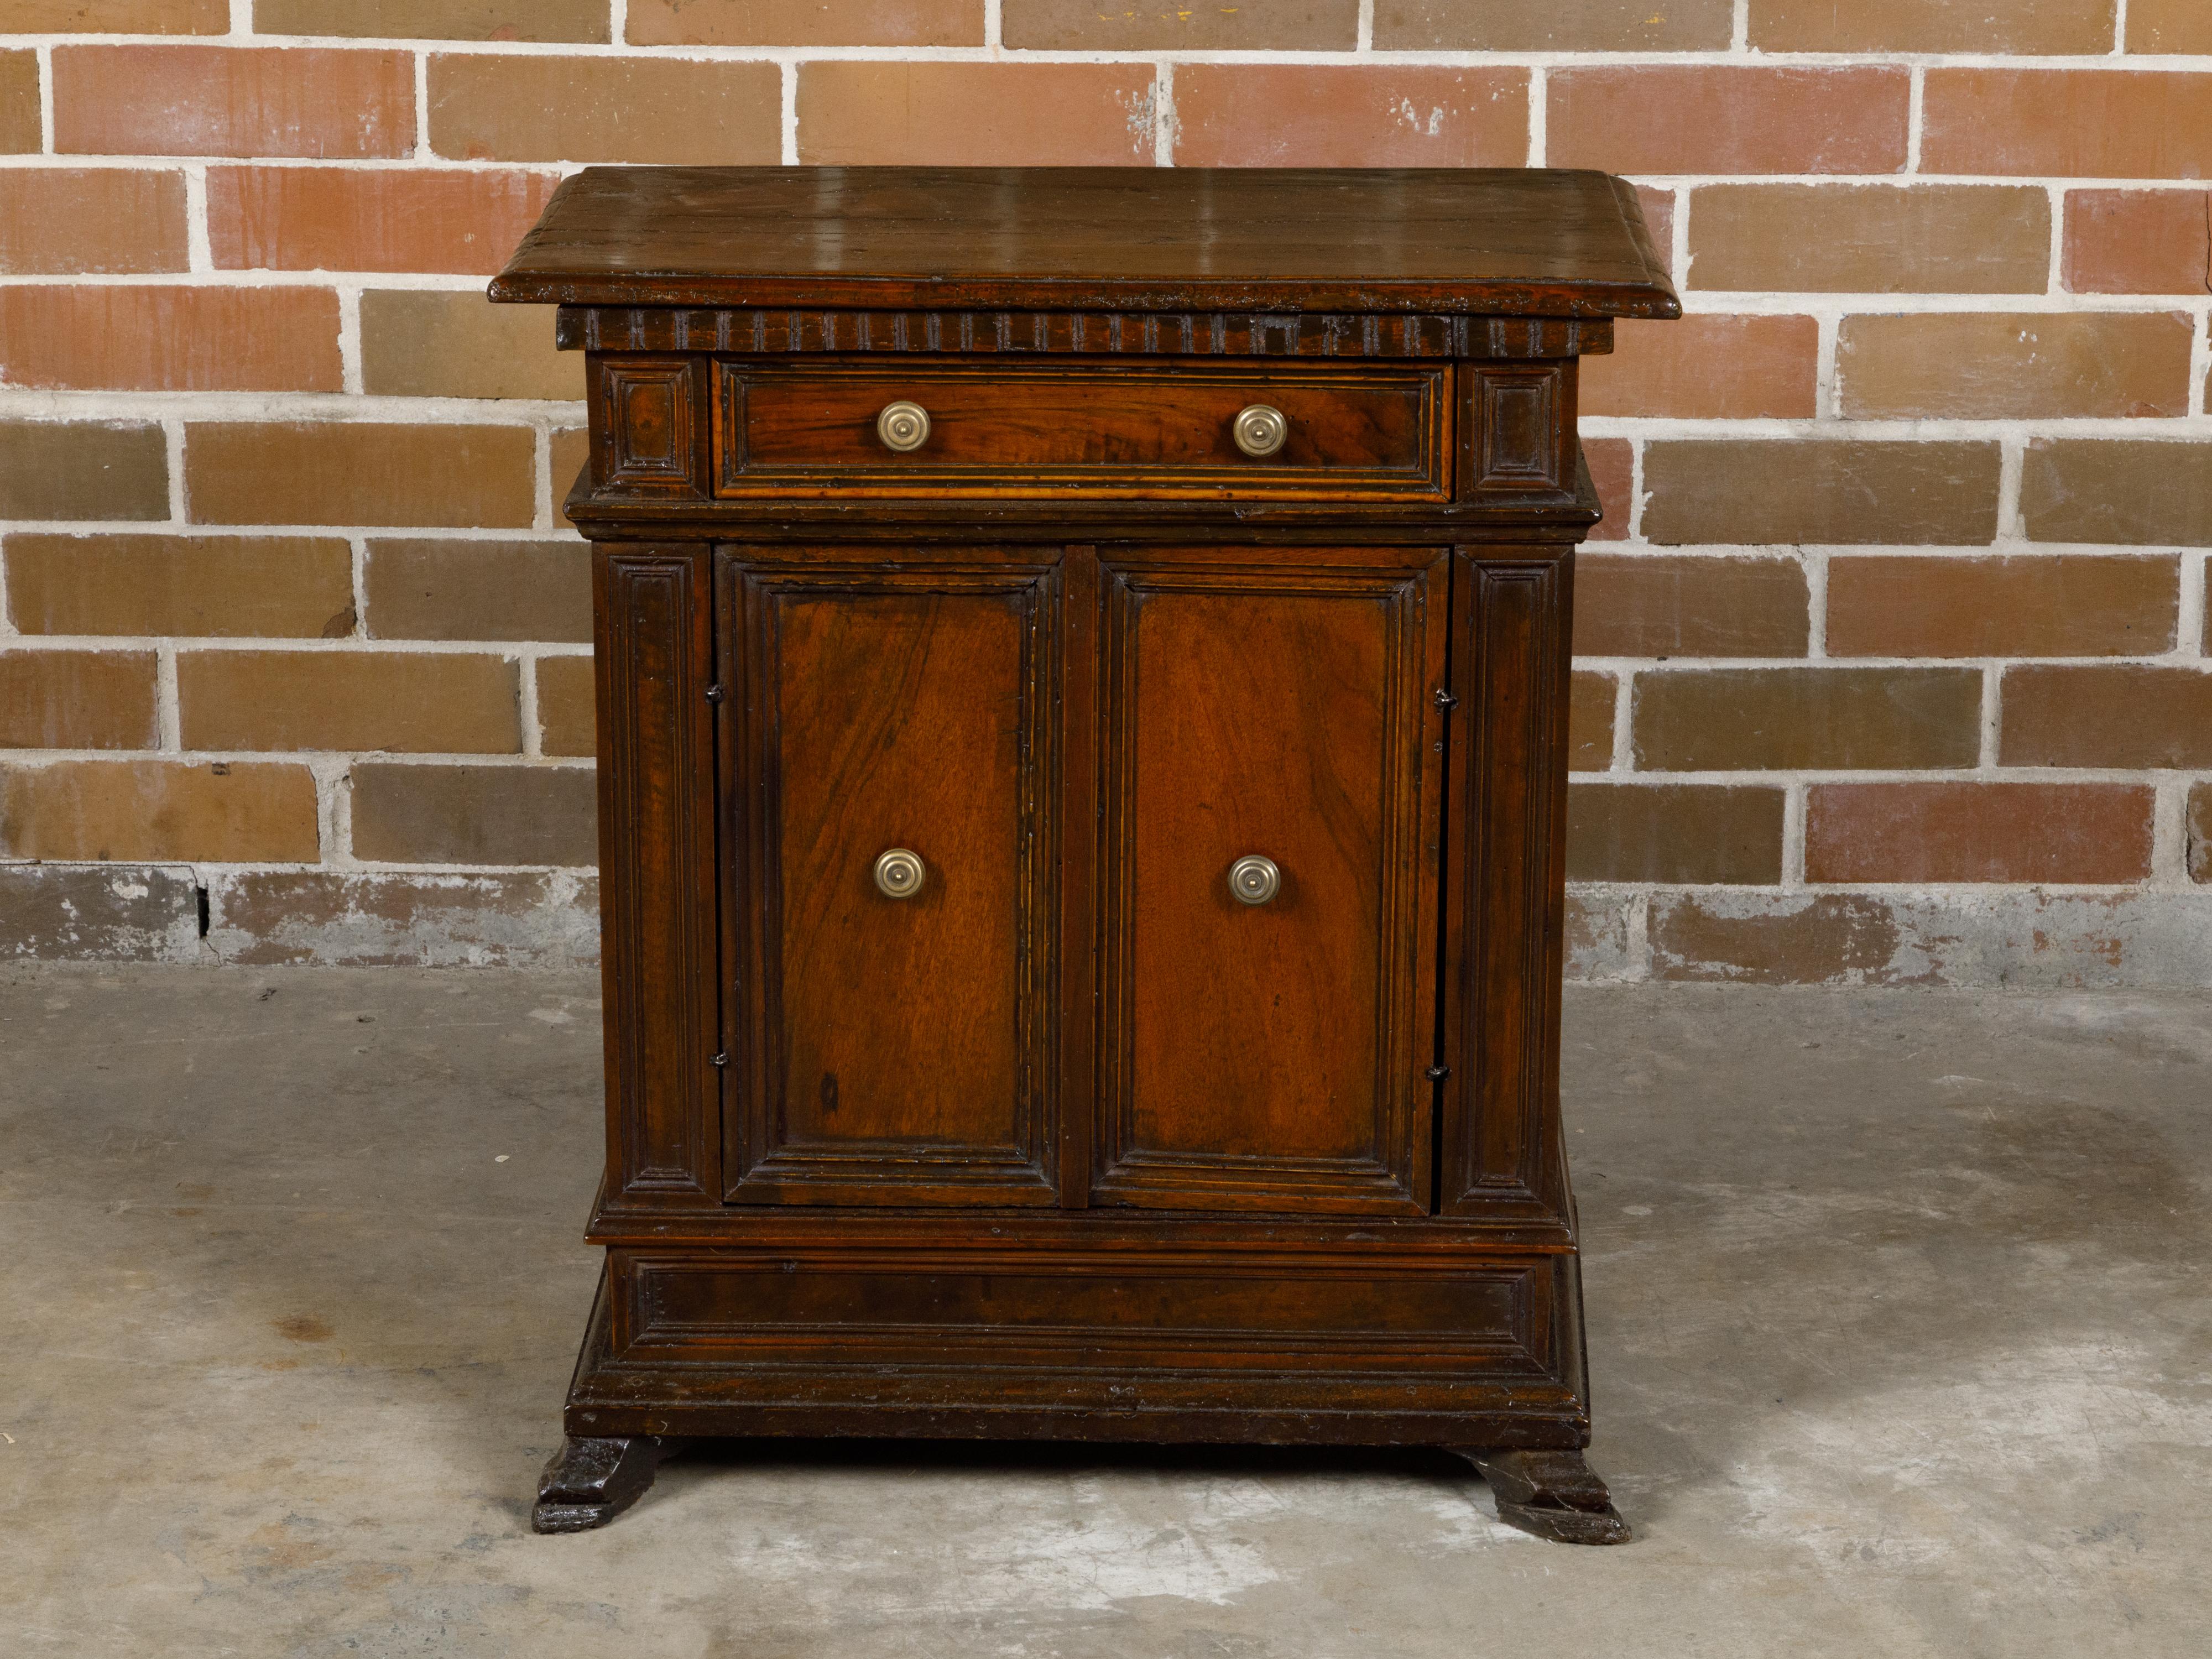 An Italian walnut credenzino from the 19th century with single drawer, petite double doors, carved dentil molding and feet. This Italian walnut credenzino from the 19th century is a masterpiece of craftsmanship and elegance, combining utility with